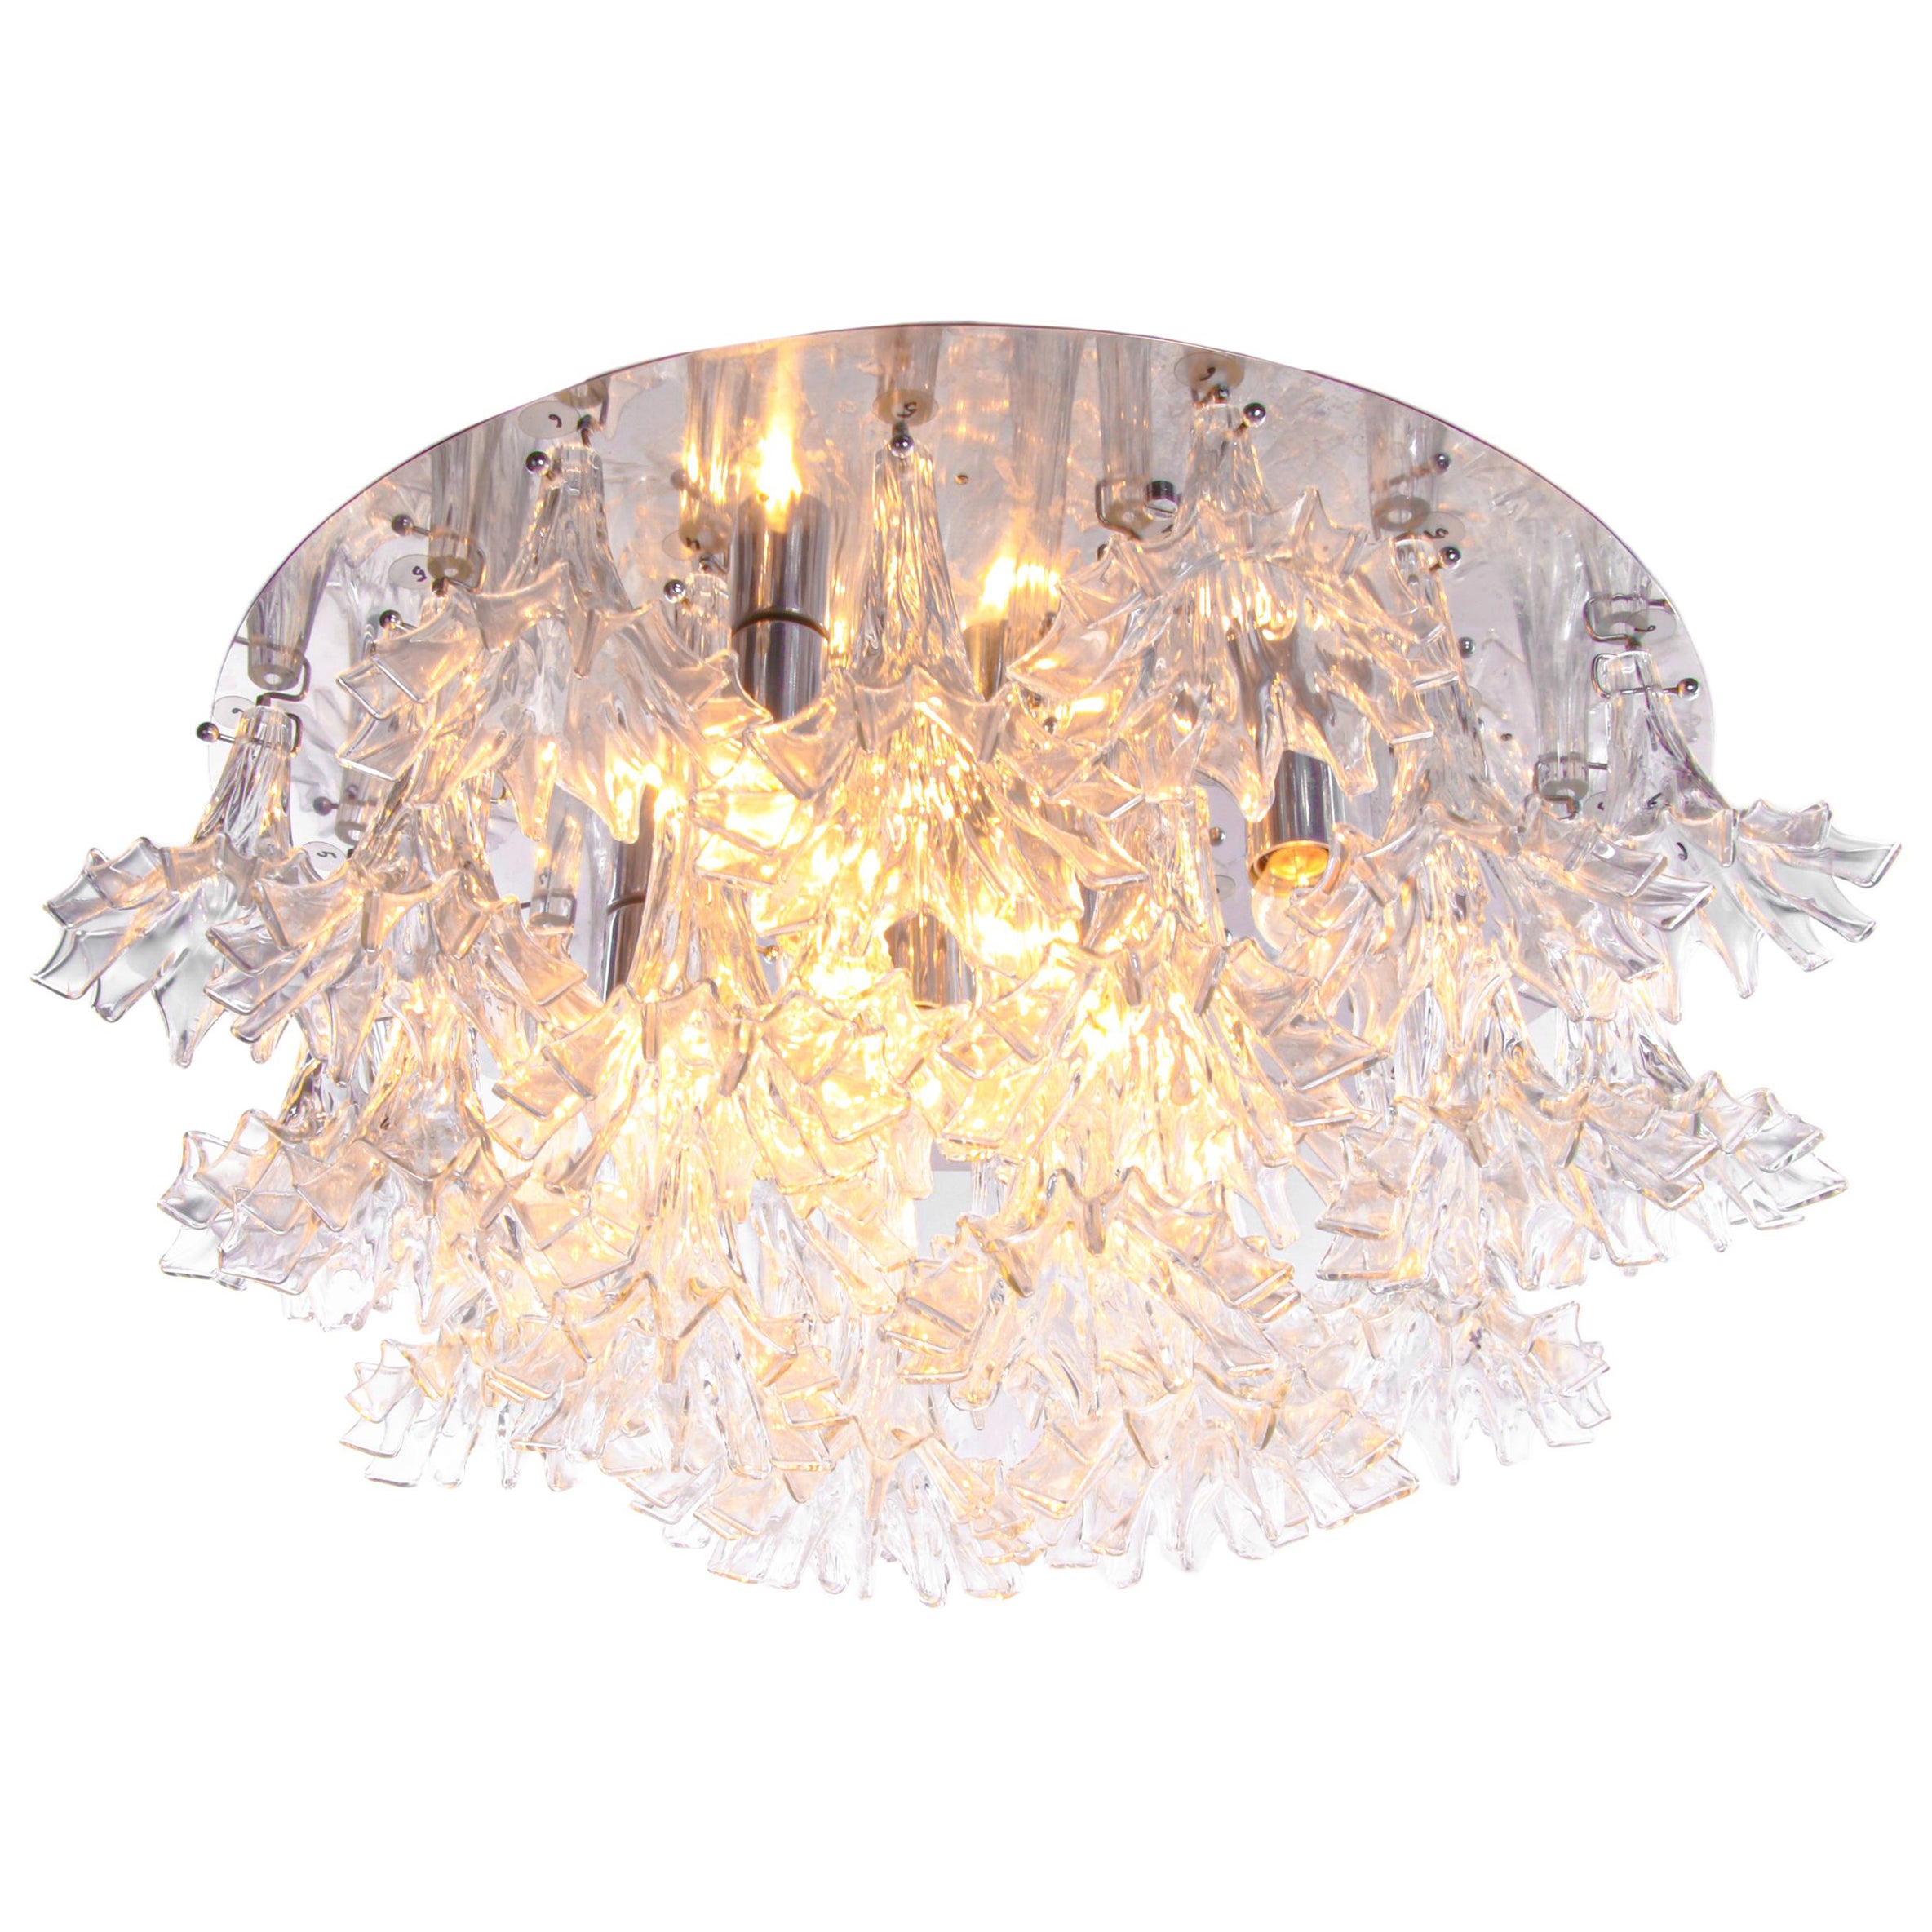 1 'of 2' Arethusa Murano 34" Flush Mount Chandelier by Barovier & Toso, 1960s